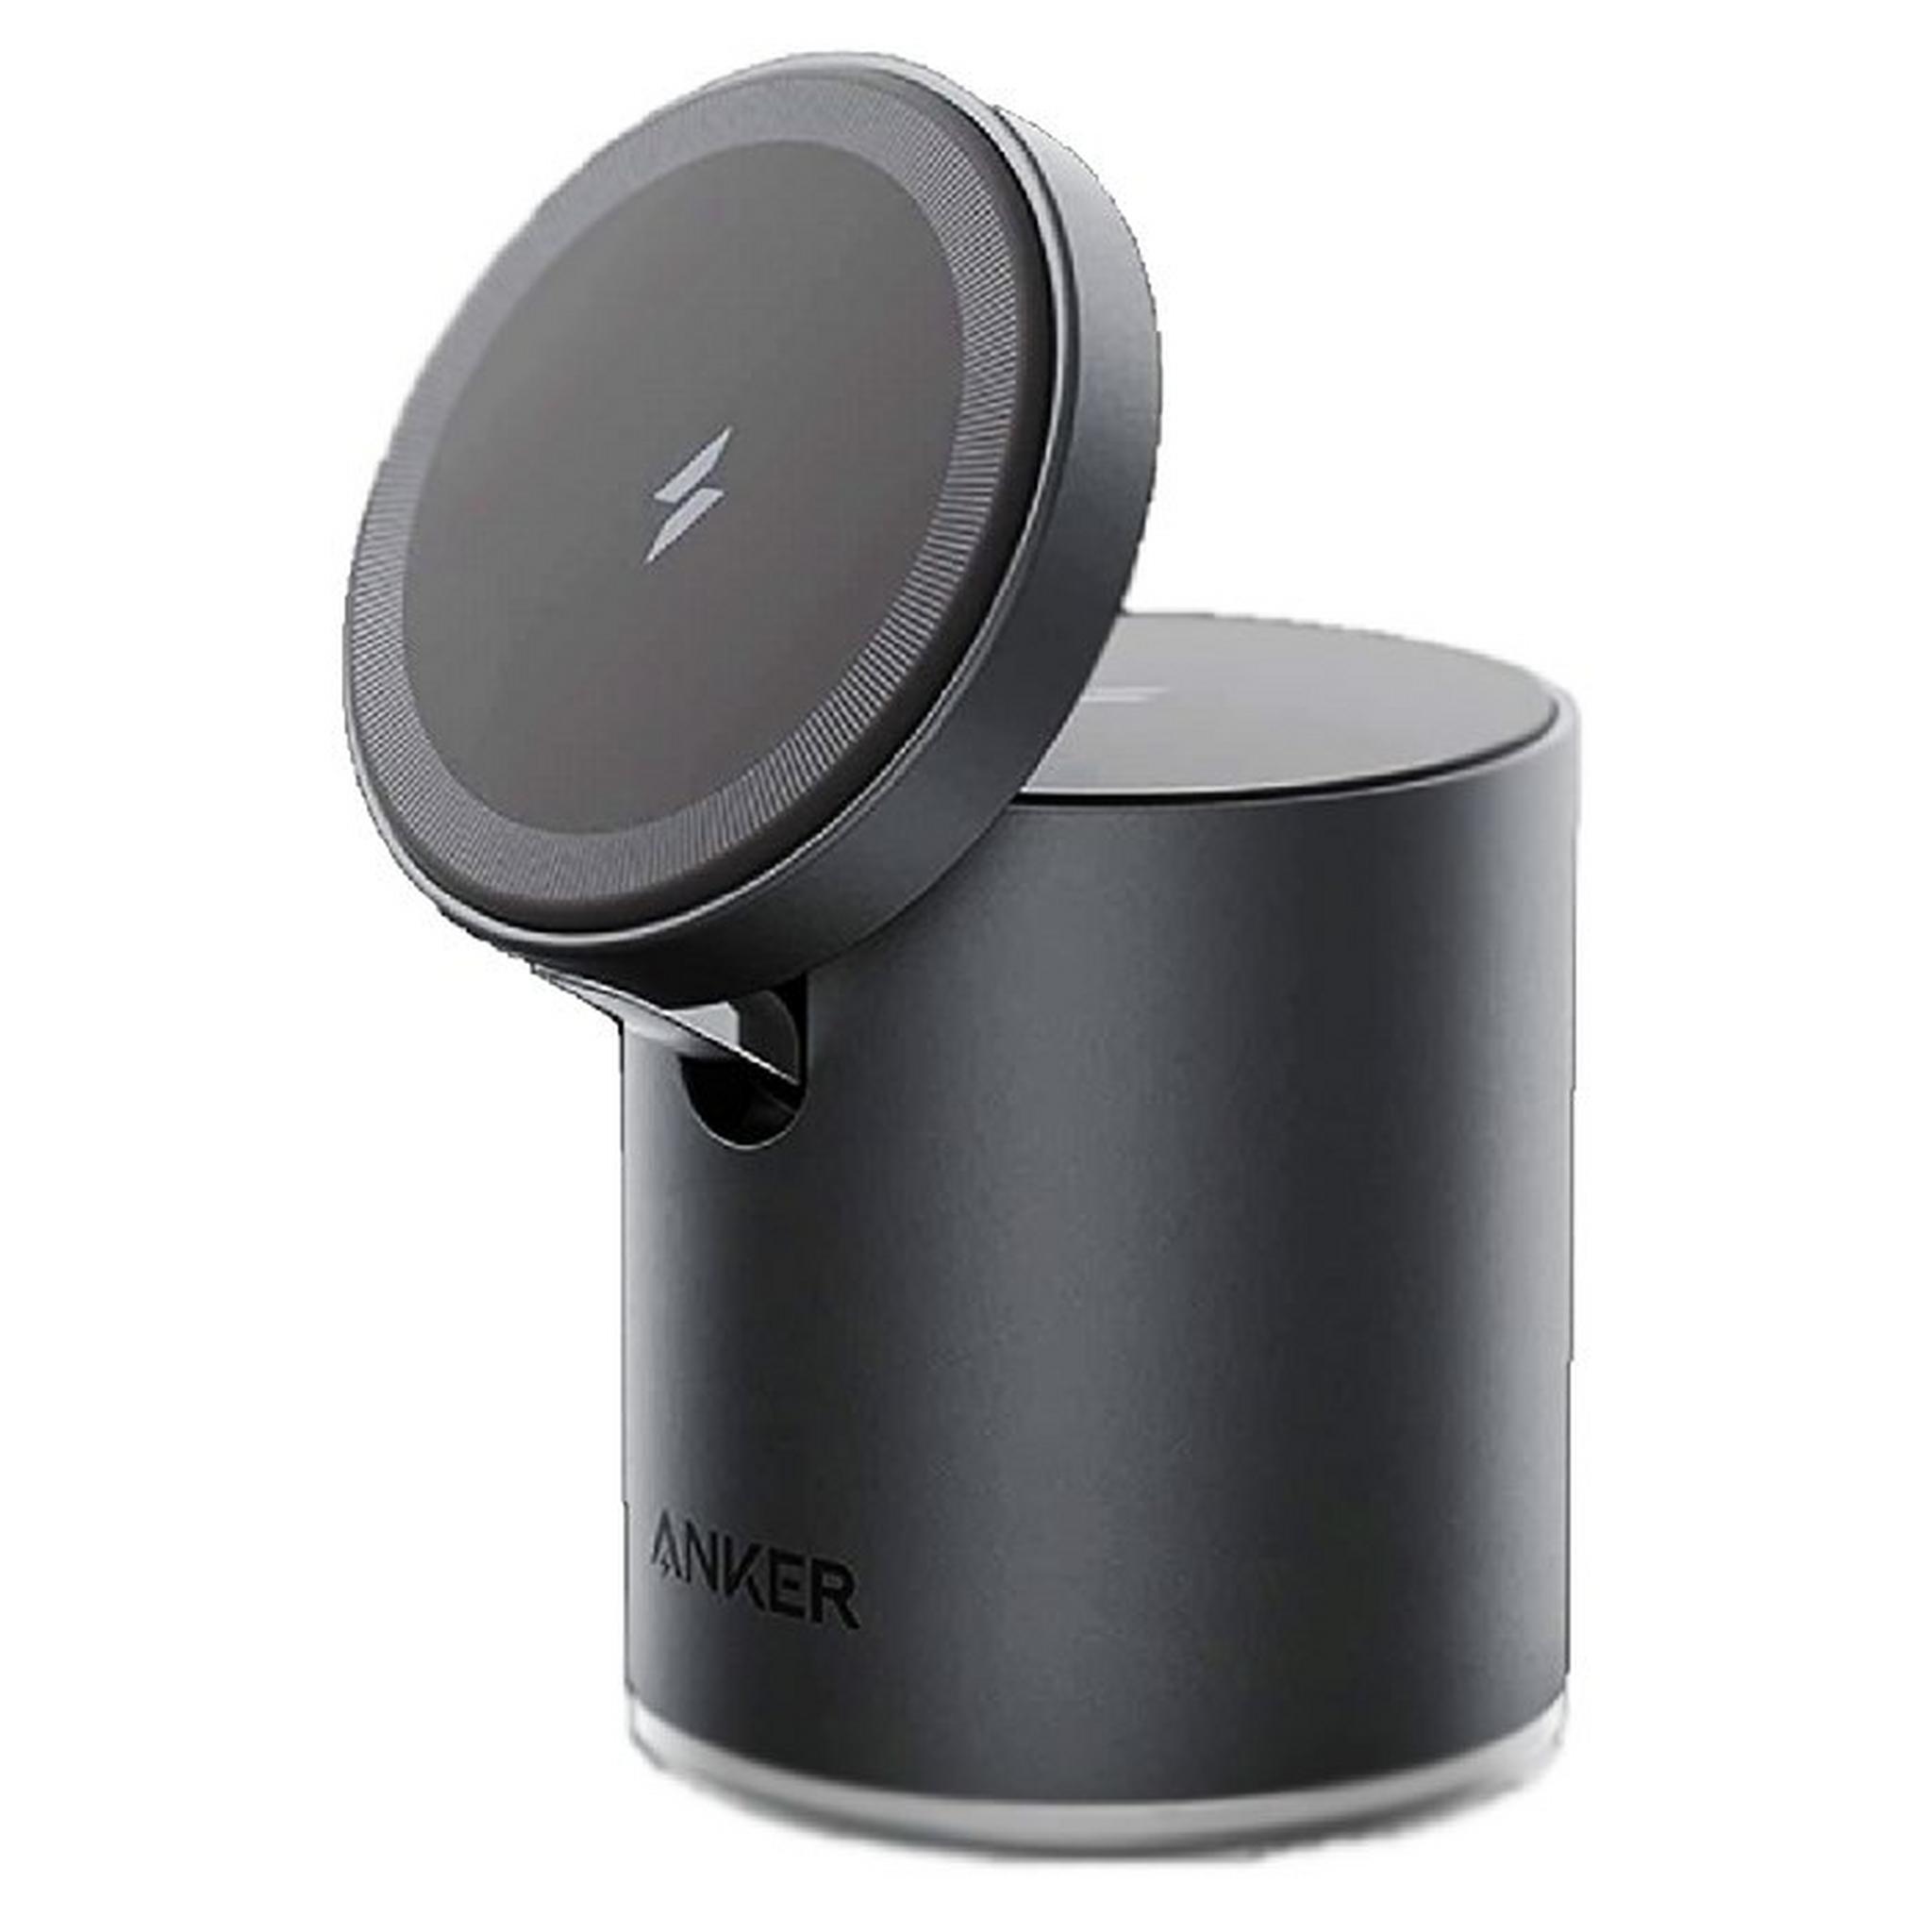 Anker Magnetic Wireless Charger Station 20W - Black